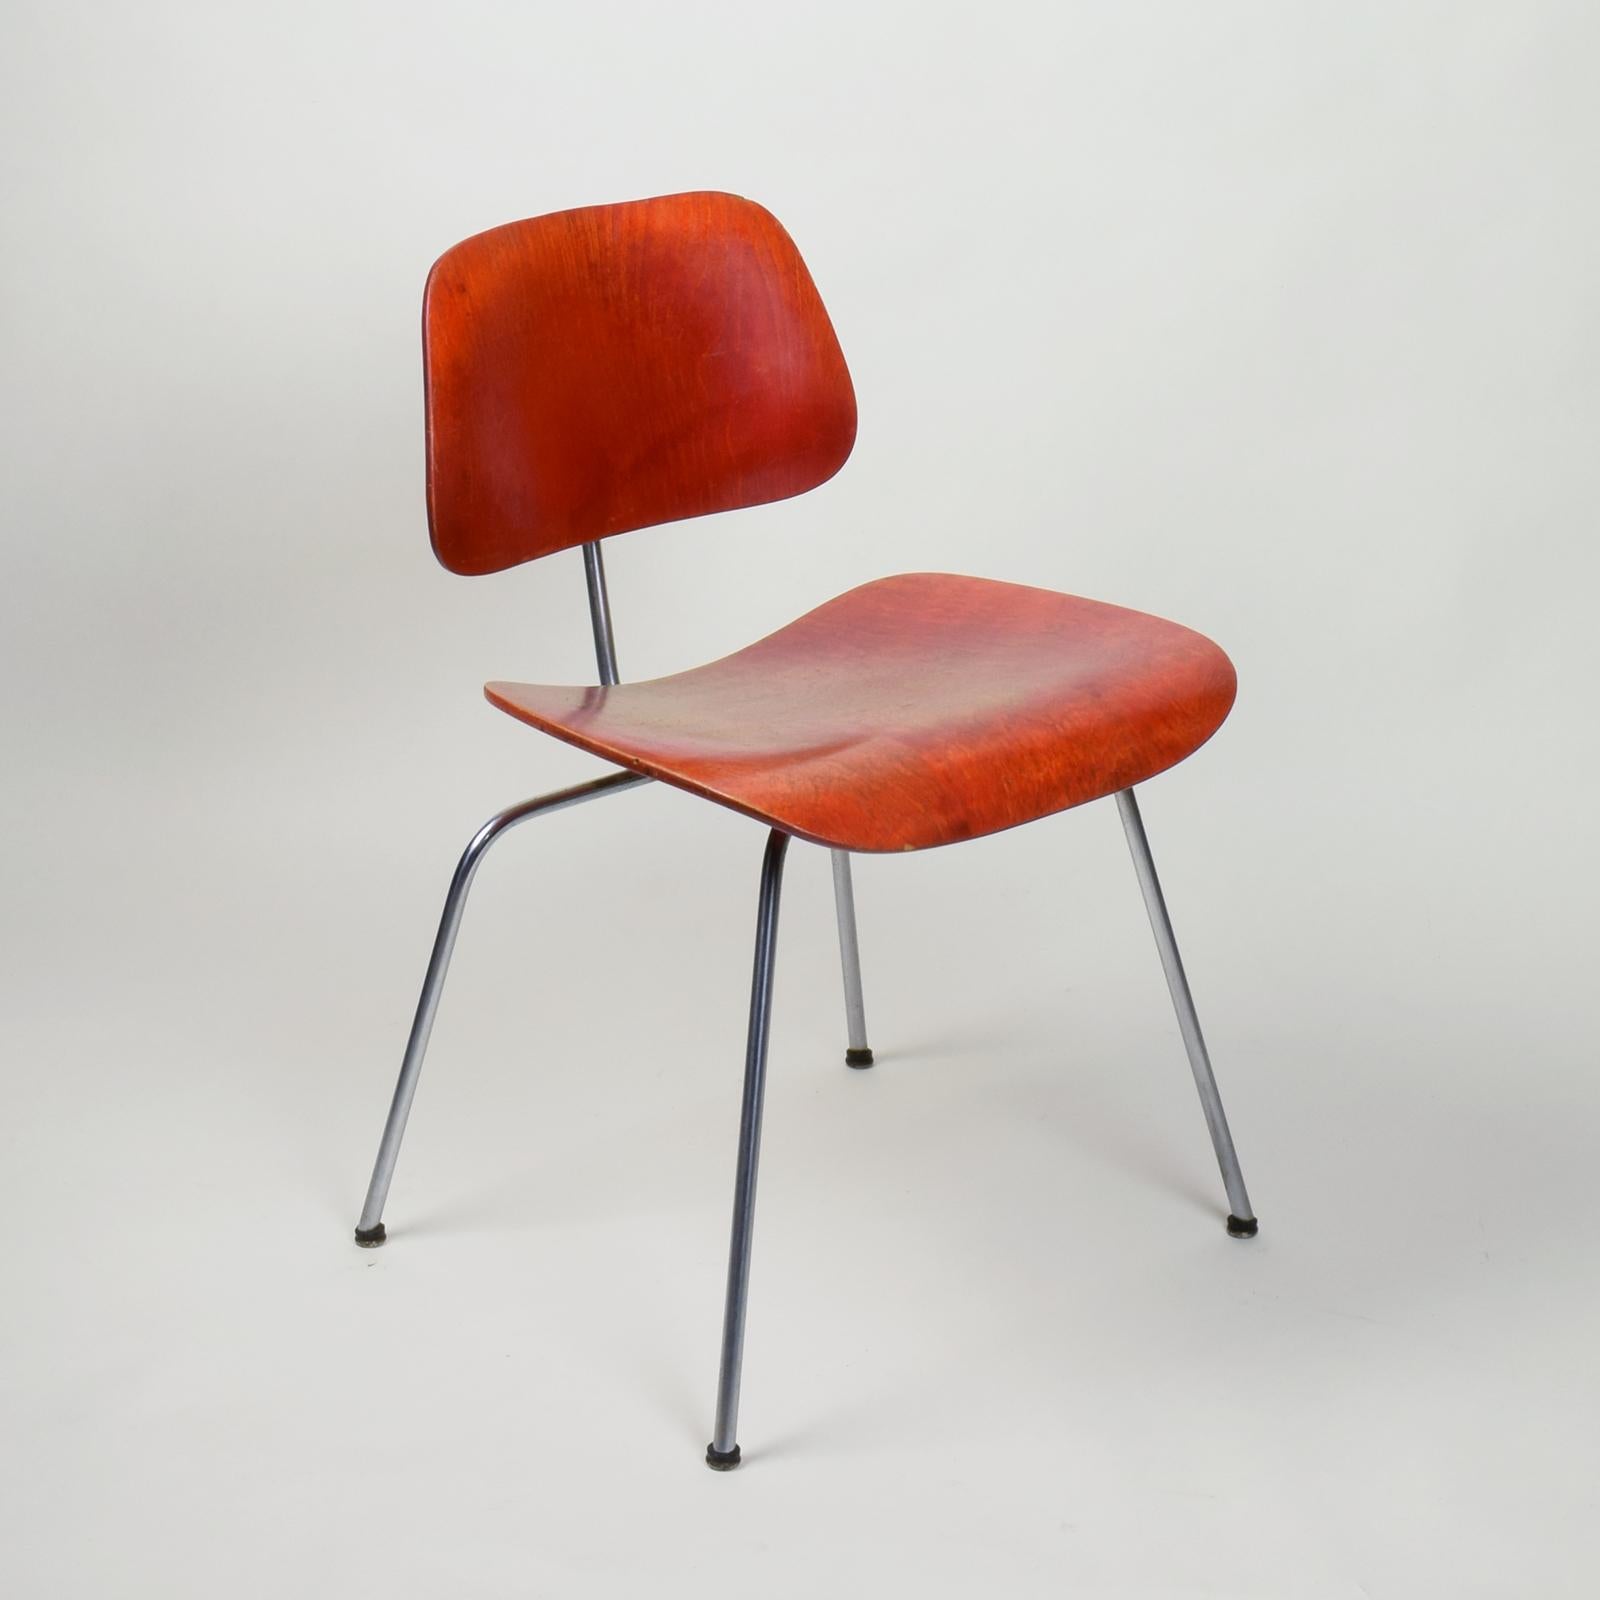 Charles & Ray Eames, 'DCM' Chair for Herman Miller, Stunning Early Version 1